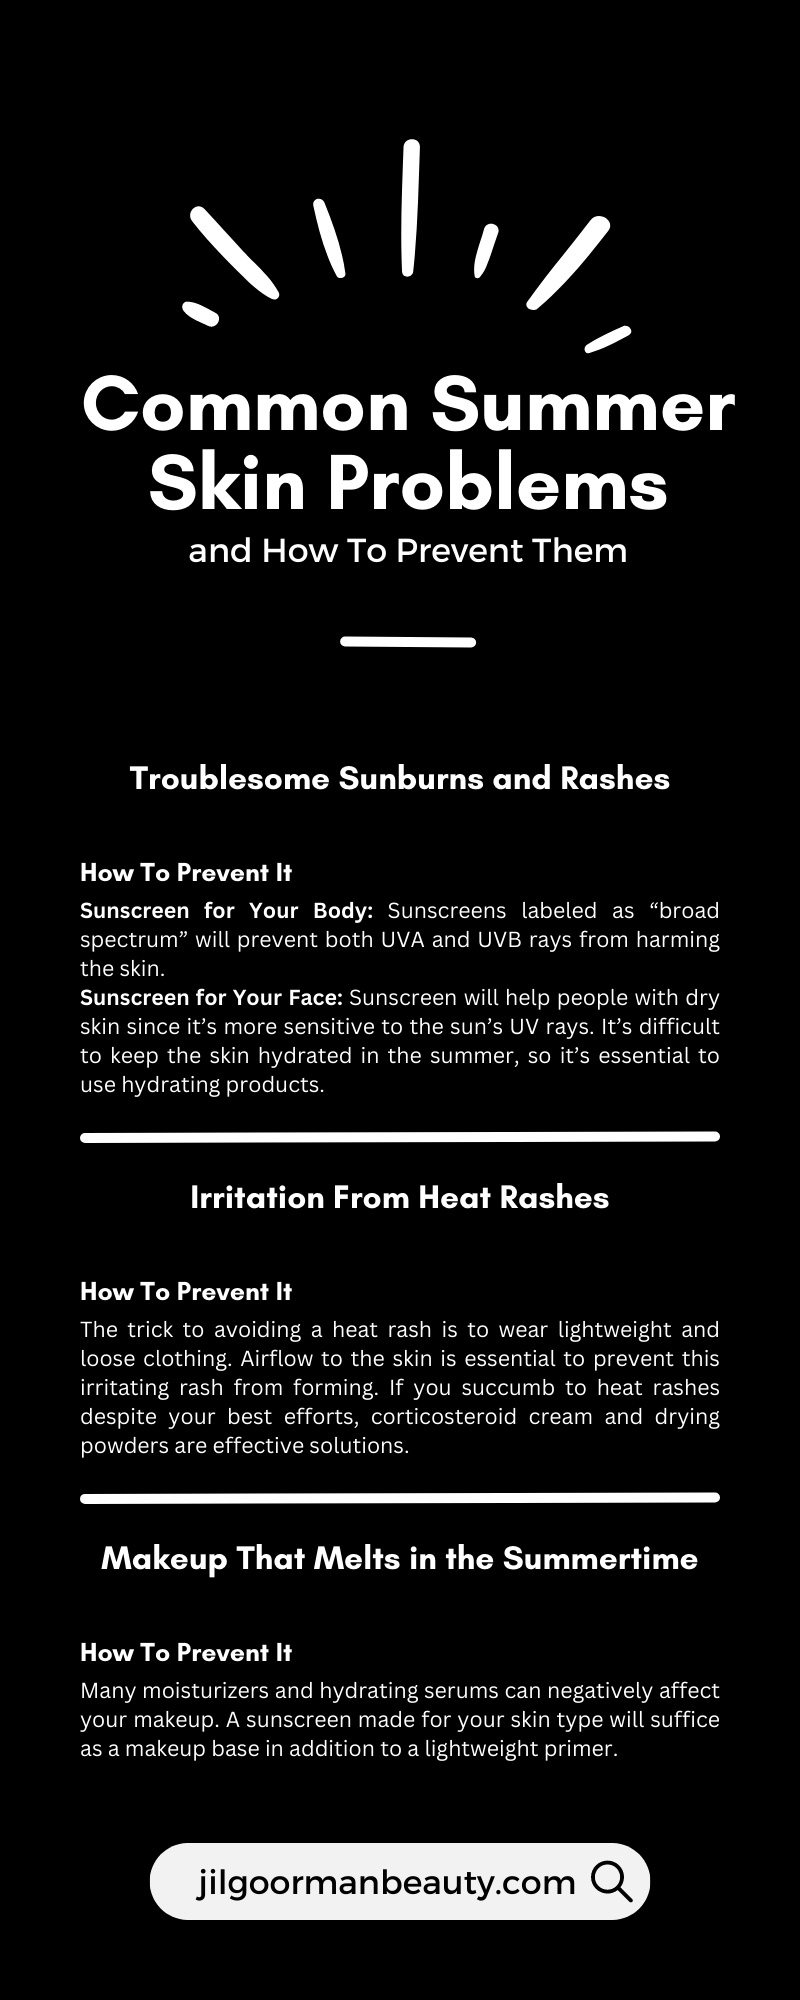 Common Summer Skin Problems and How To Prevent Them